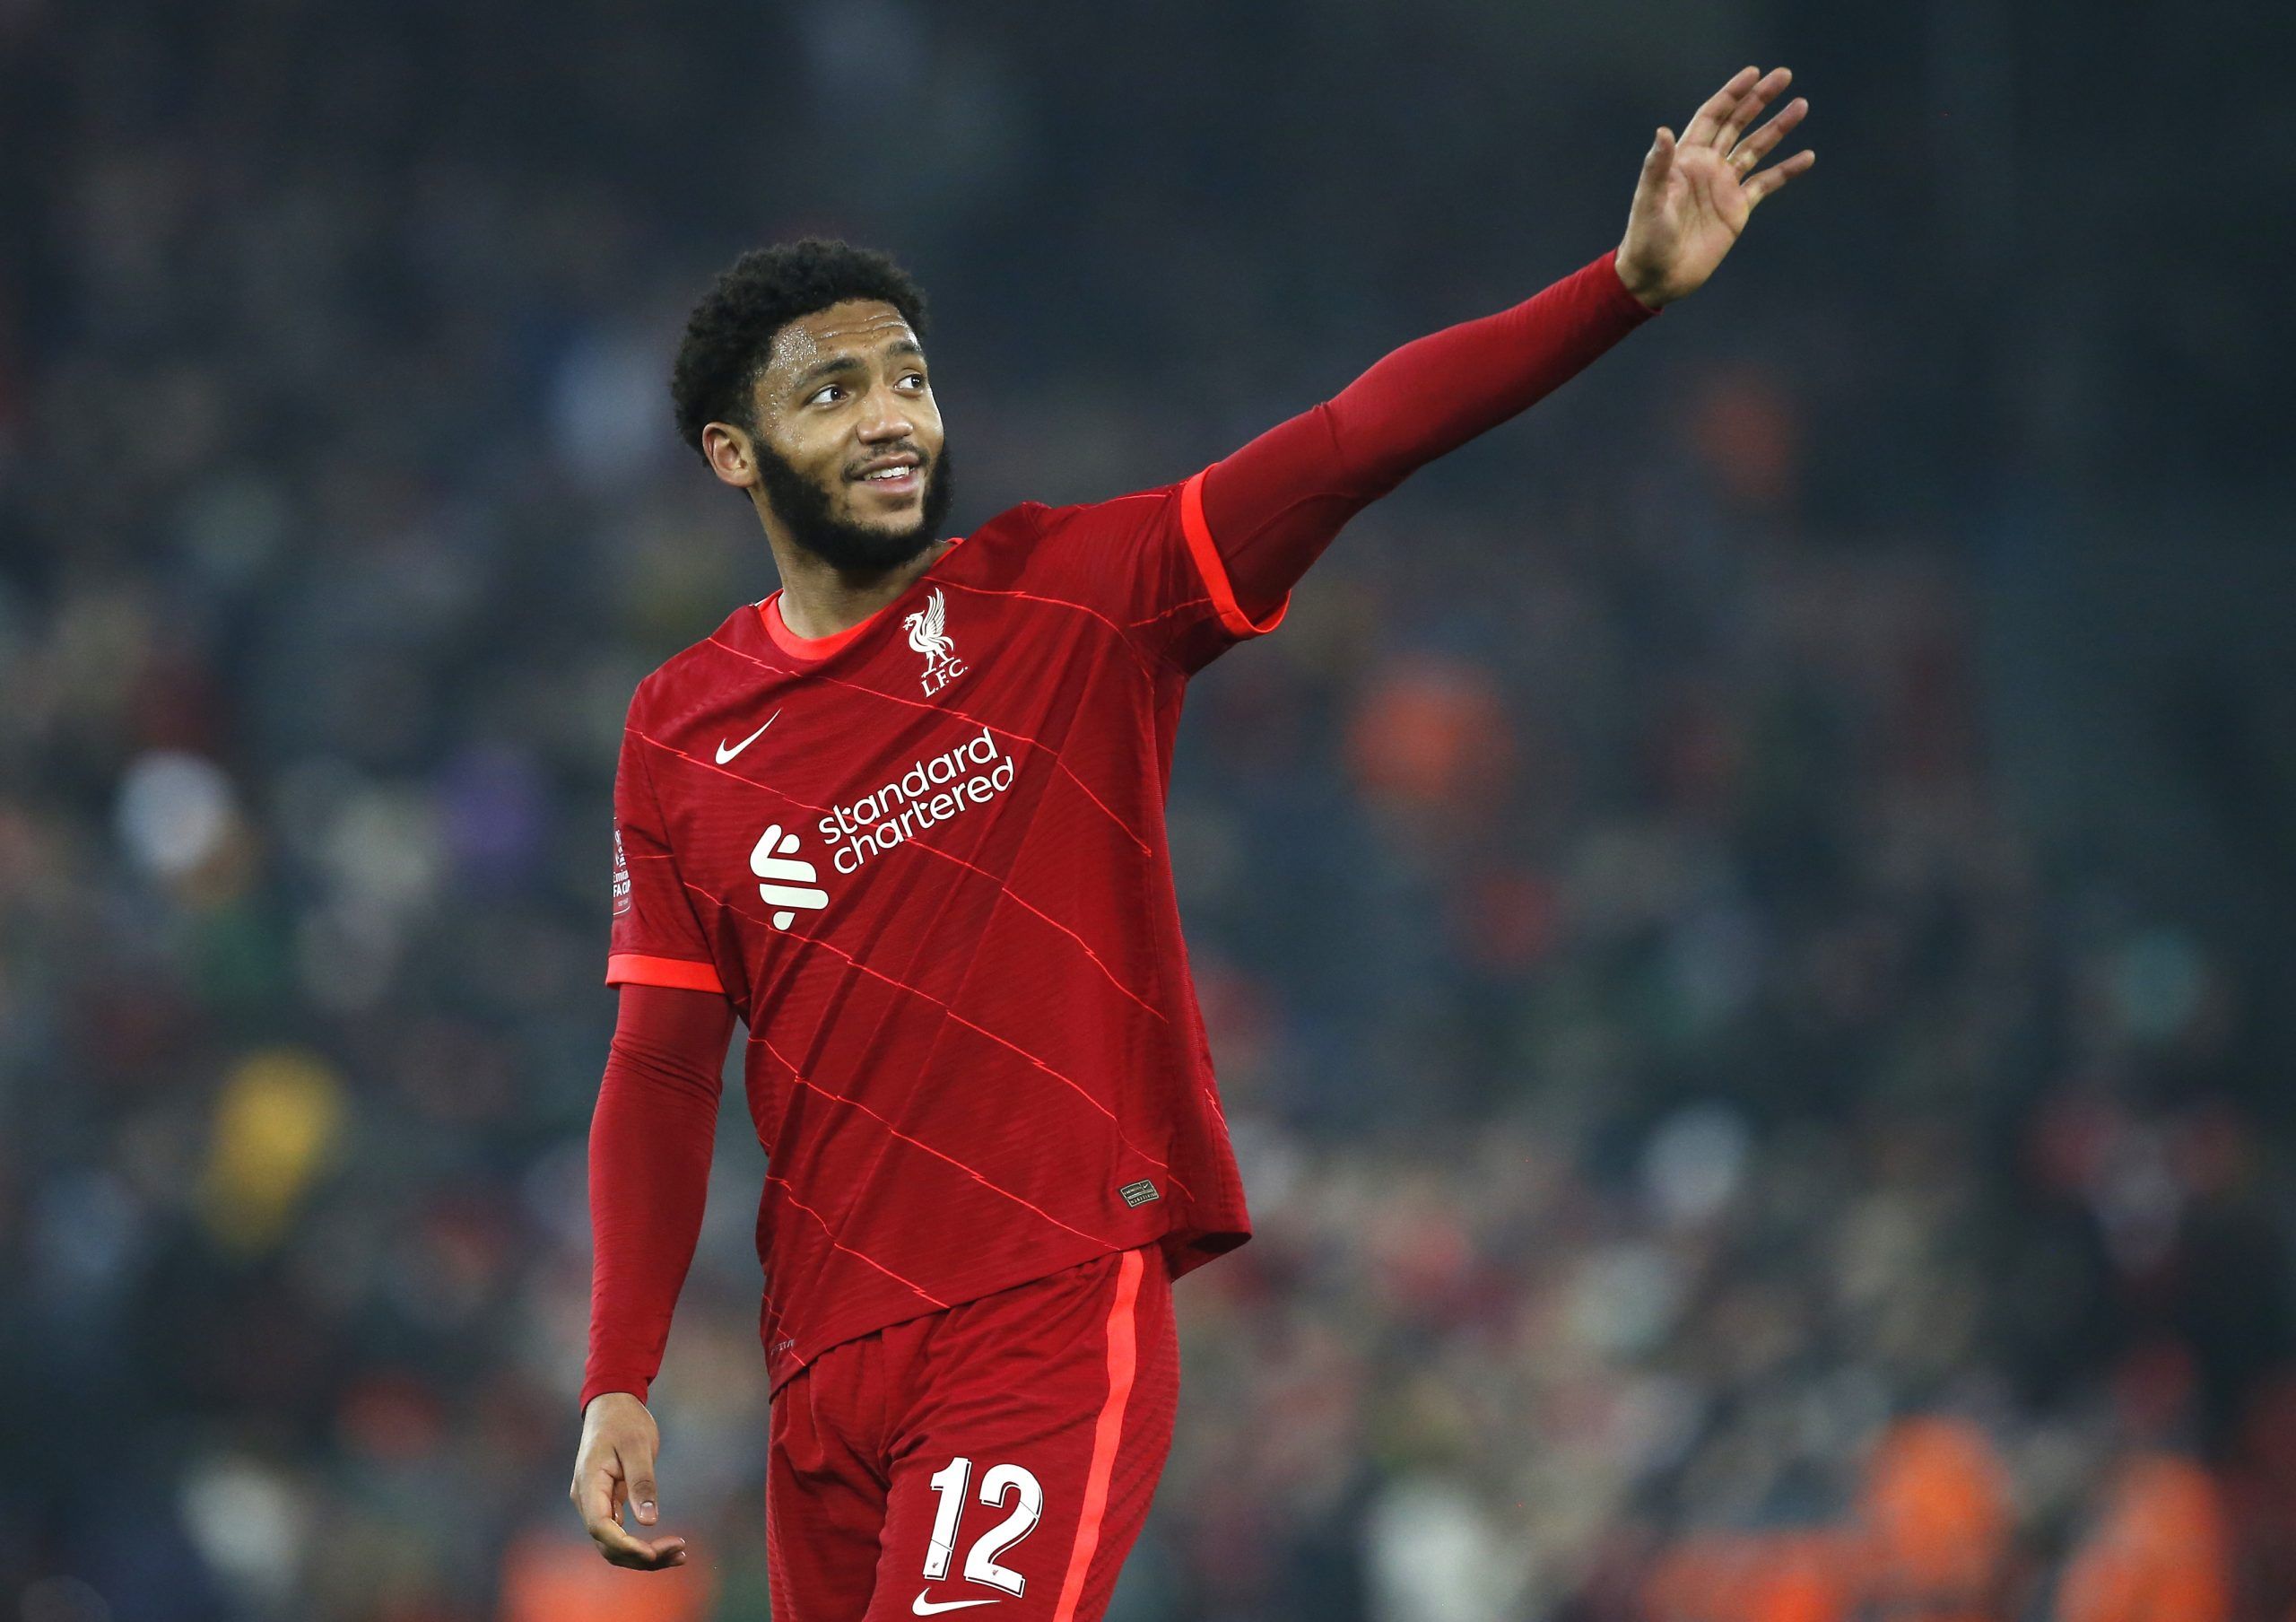 Liverpool: Joe Gomez backed to leave Anfield this summer -Liverpool News